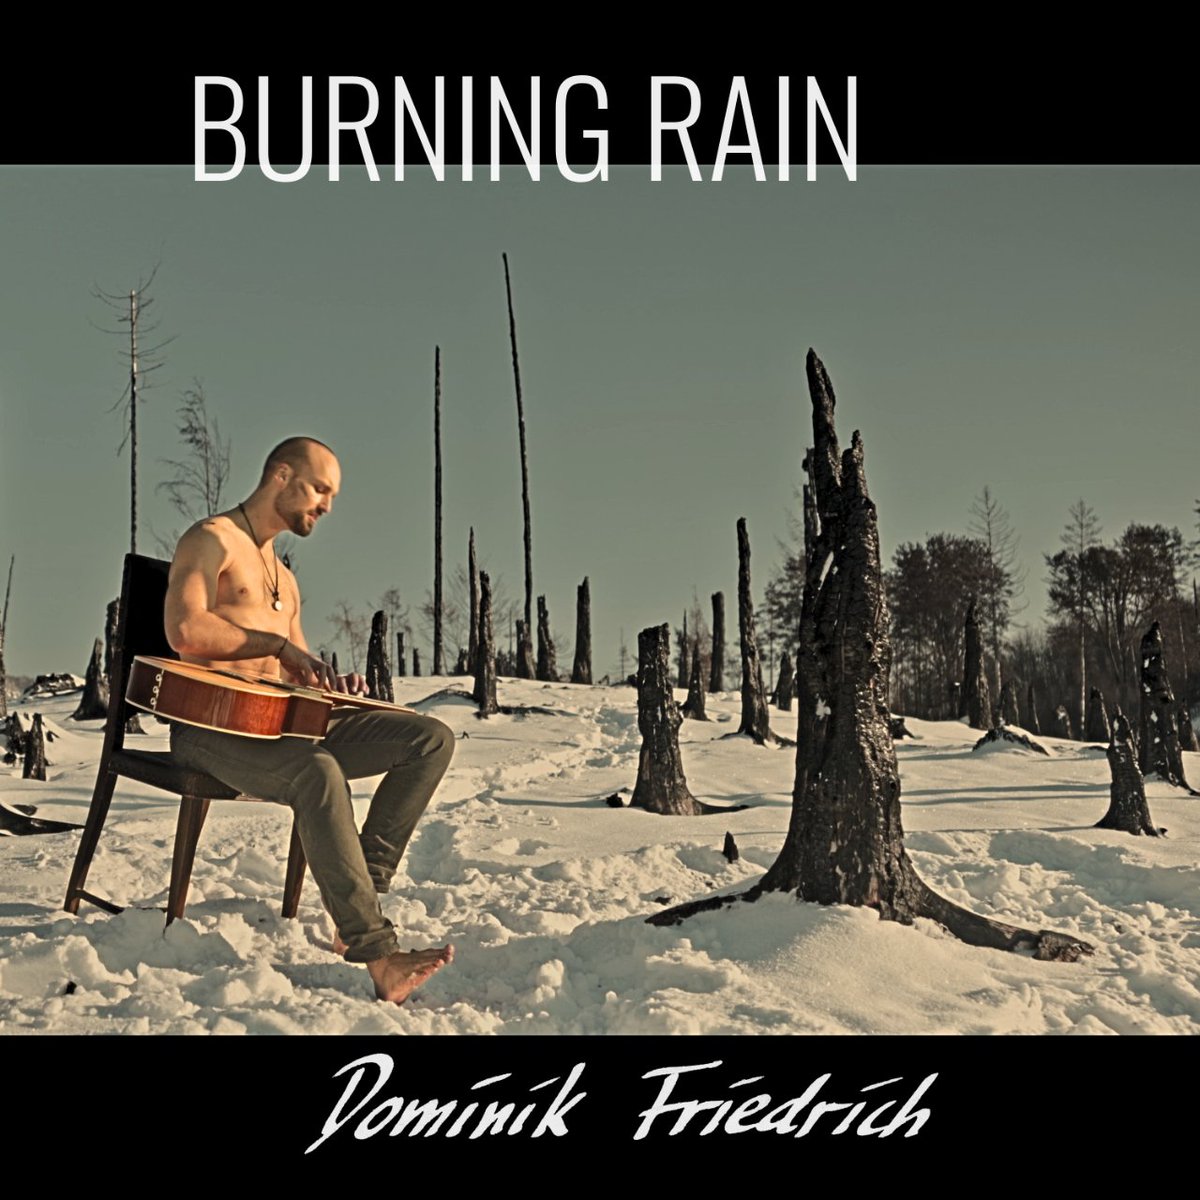 Surprise! I just released burning rain again with a cover from the music video. Much love 🖤 - Dominik
.
#burningrain #singlerelease #newsong #releaes #spotify #distrokid #indiefolk #virtuoso